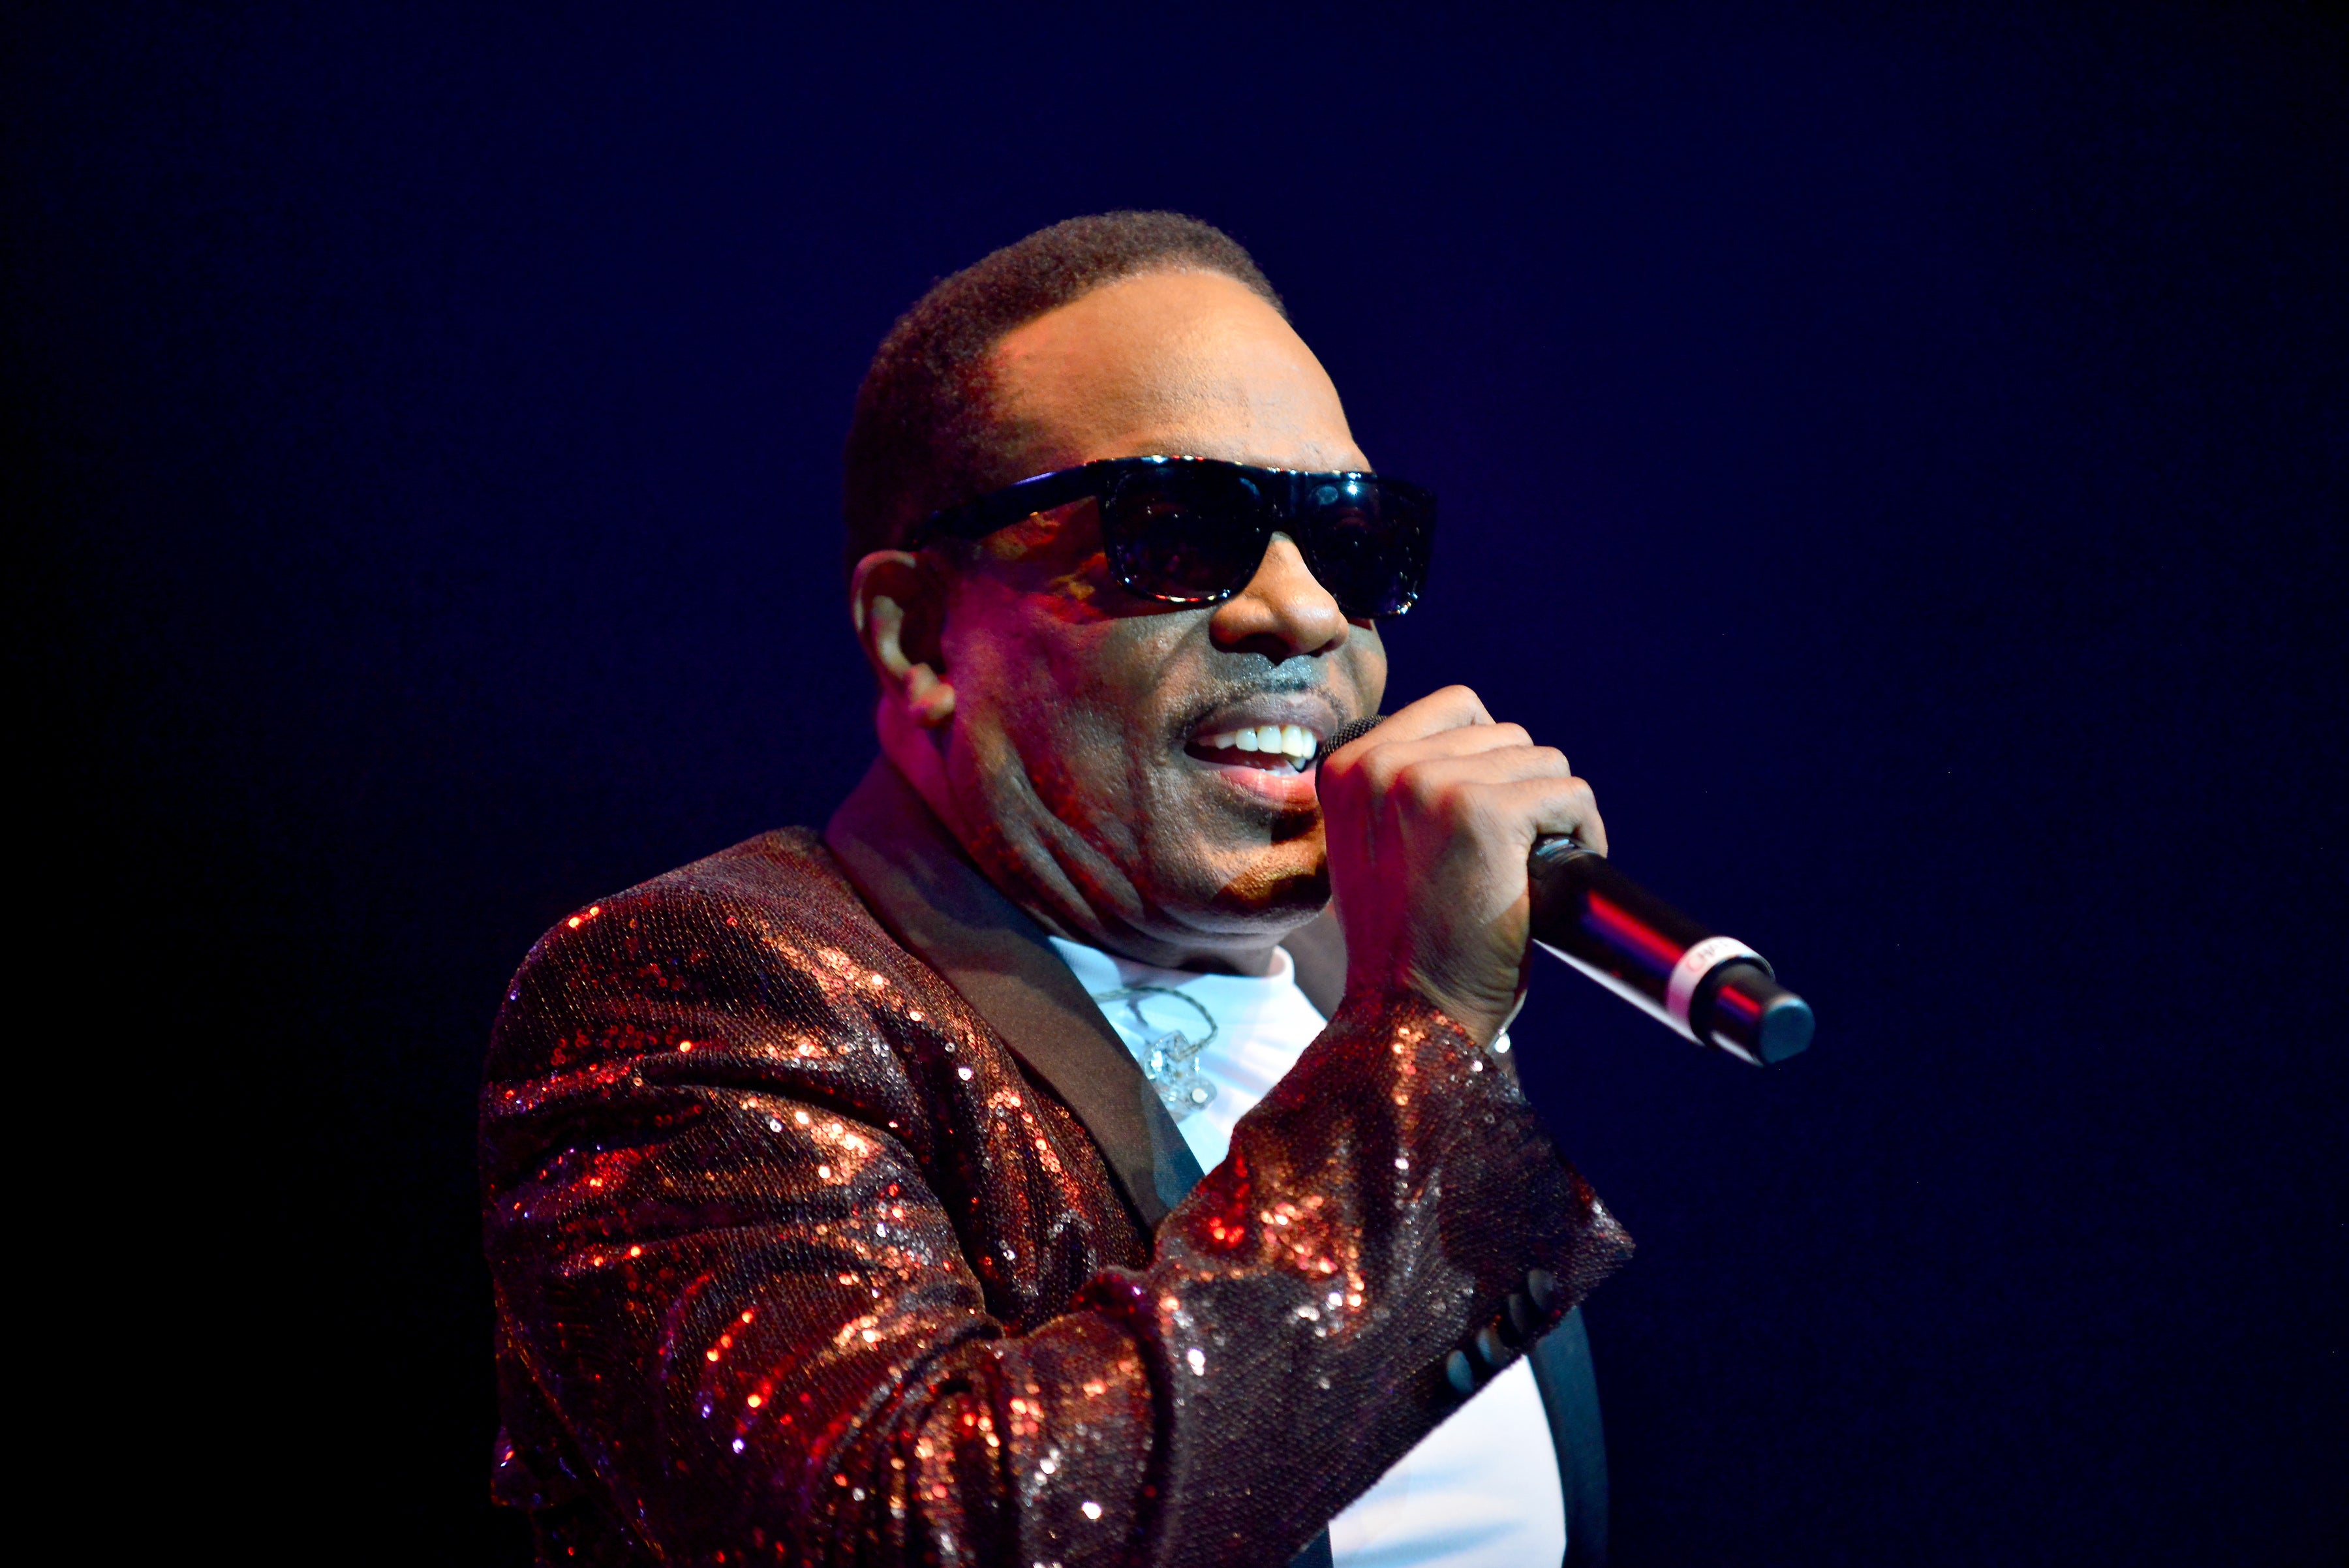 LISTEN: Charlie Wilson And Solero Brothers Release A Soulful Cover Of 'O Holy Night'
